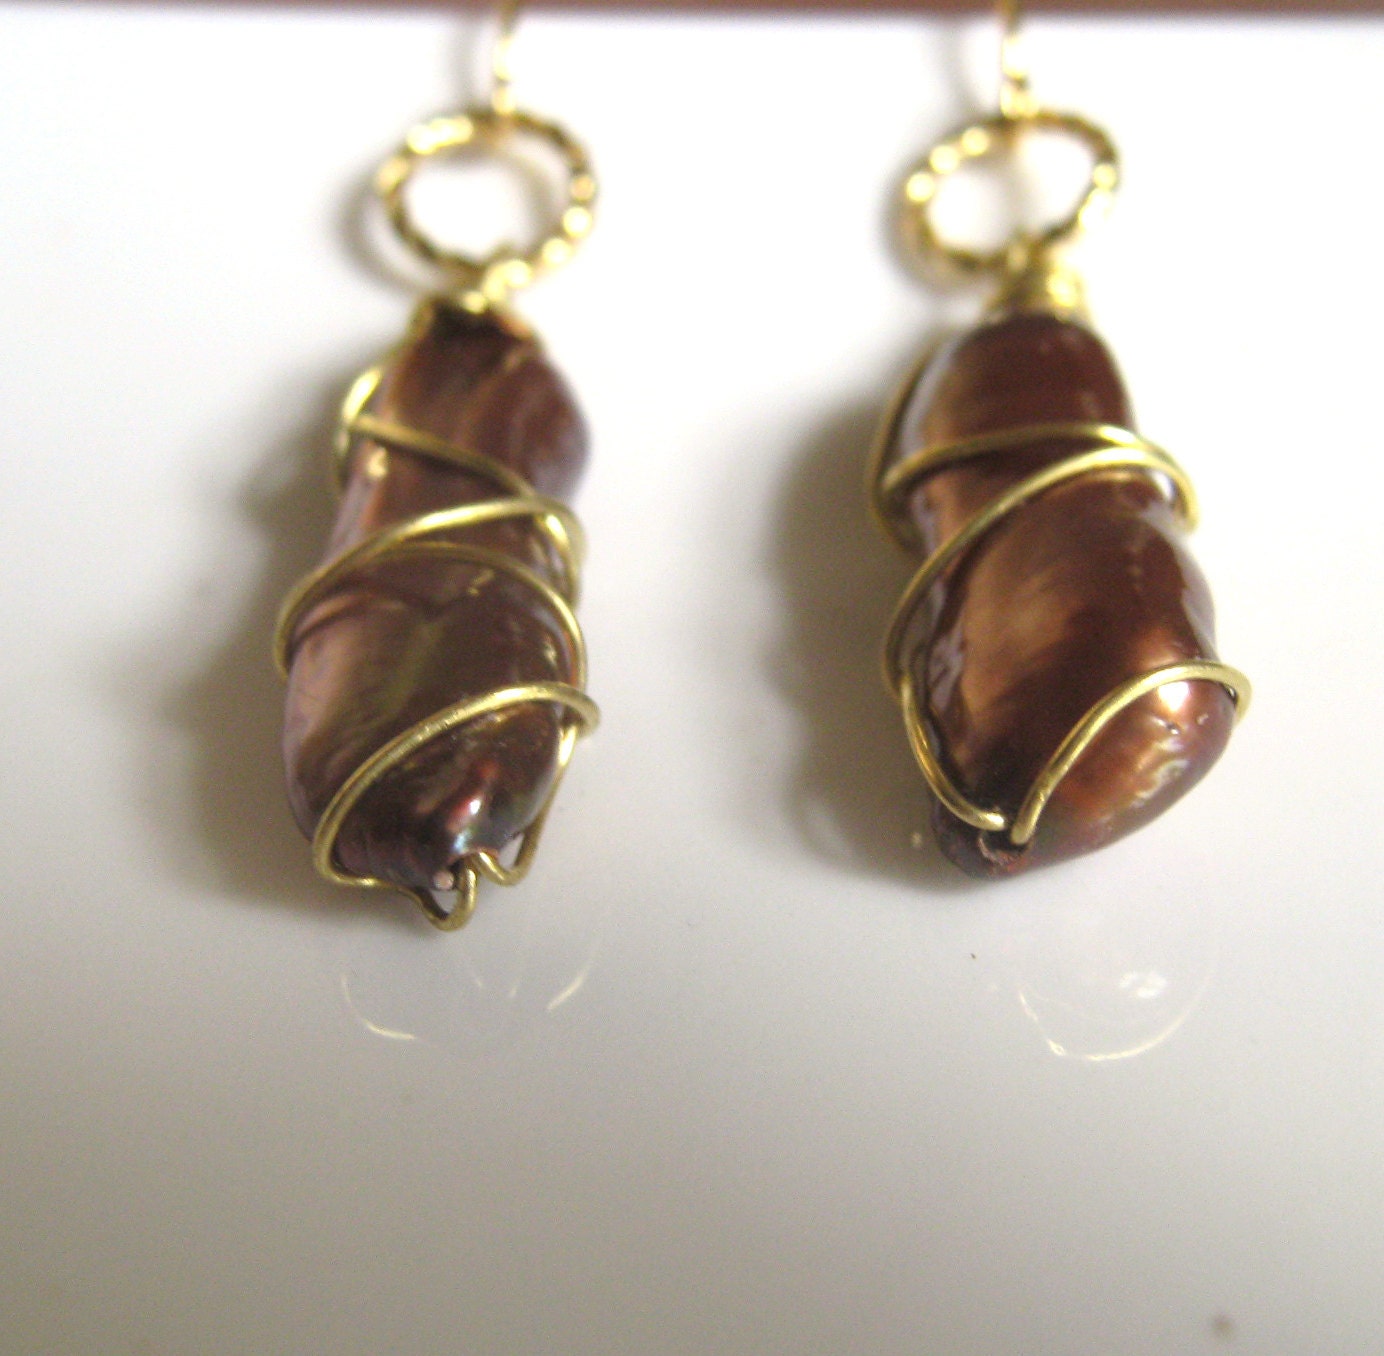 Bronze and Gold Earrings - wire wrapped stick pearls